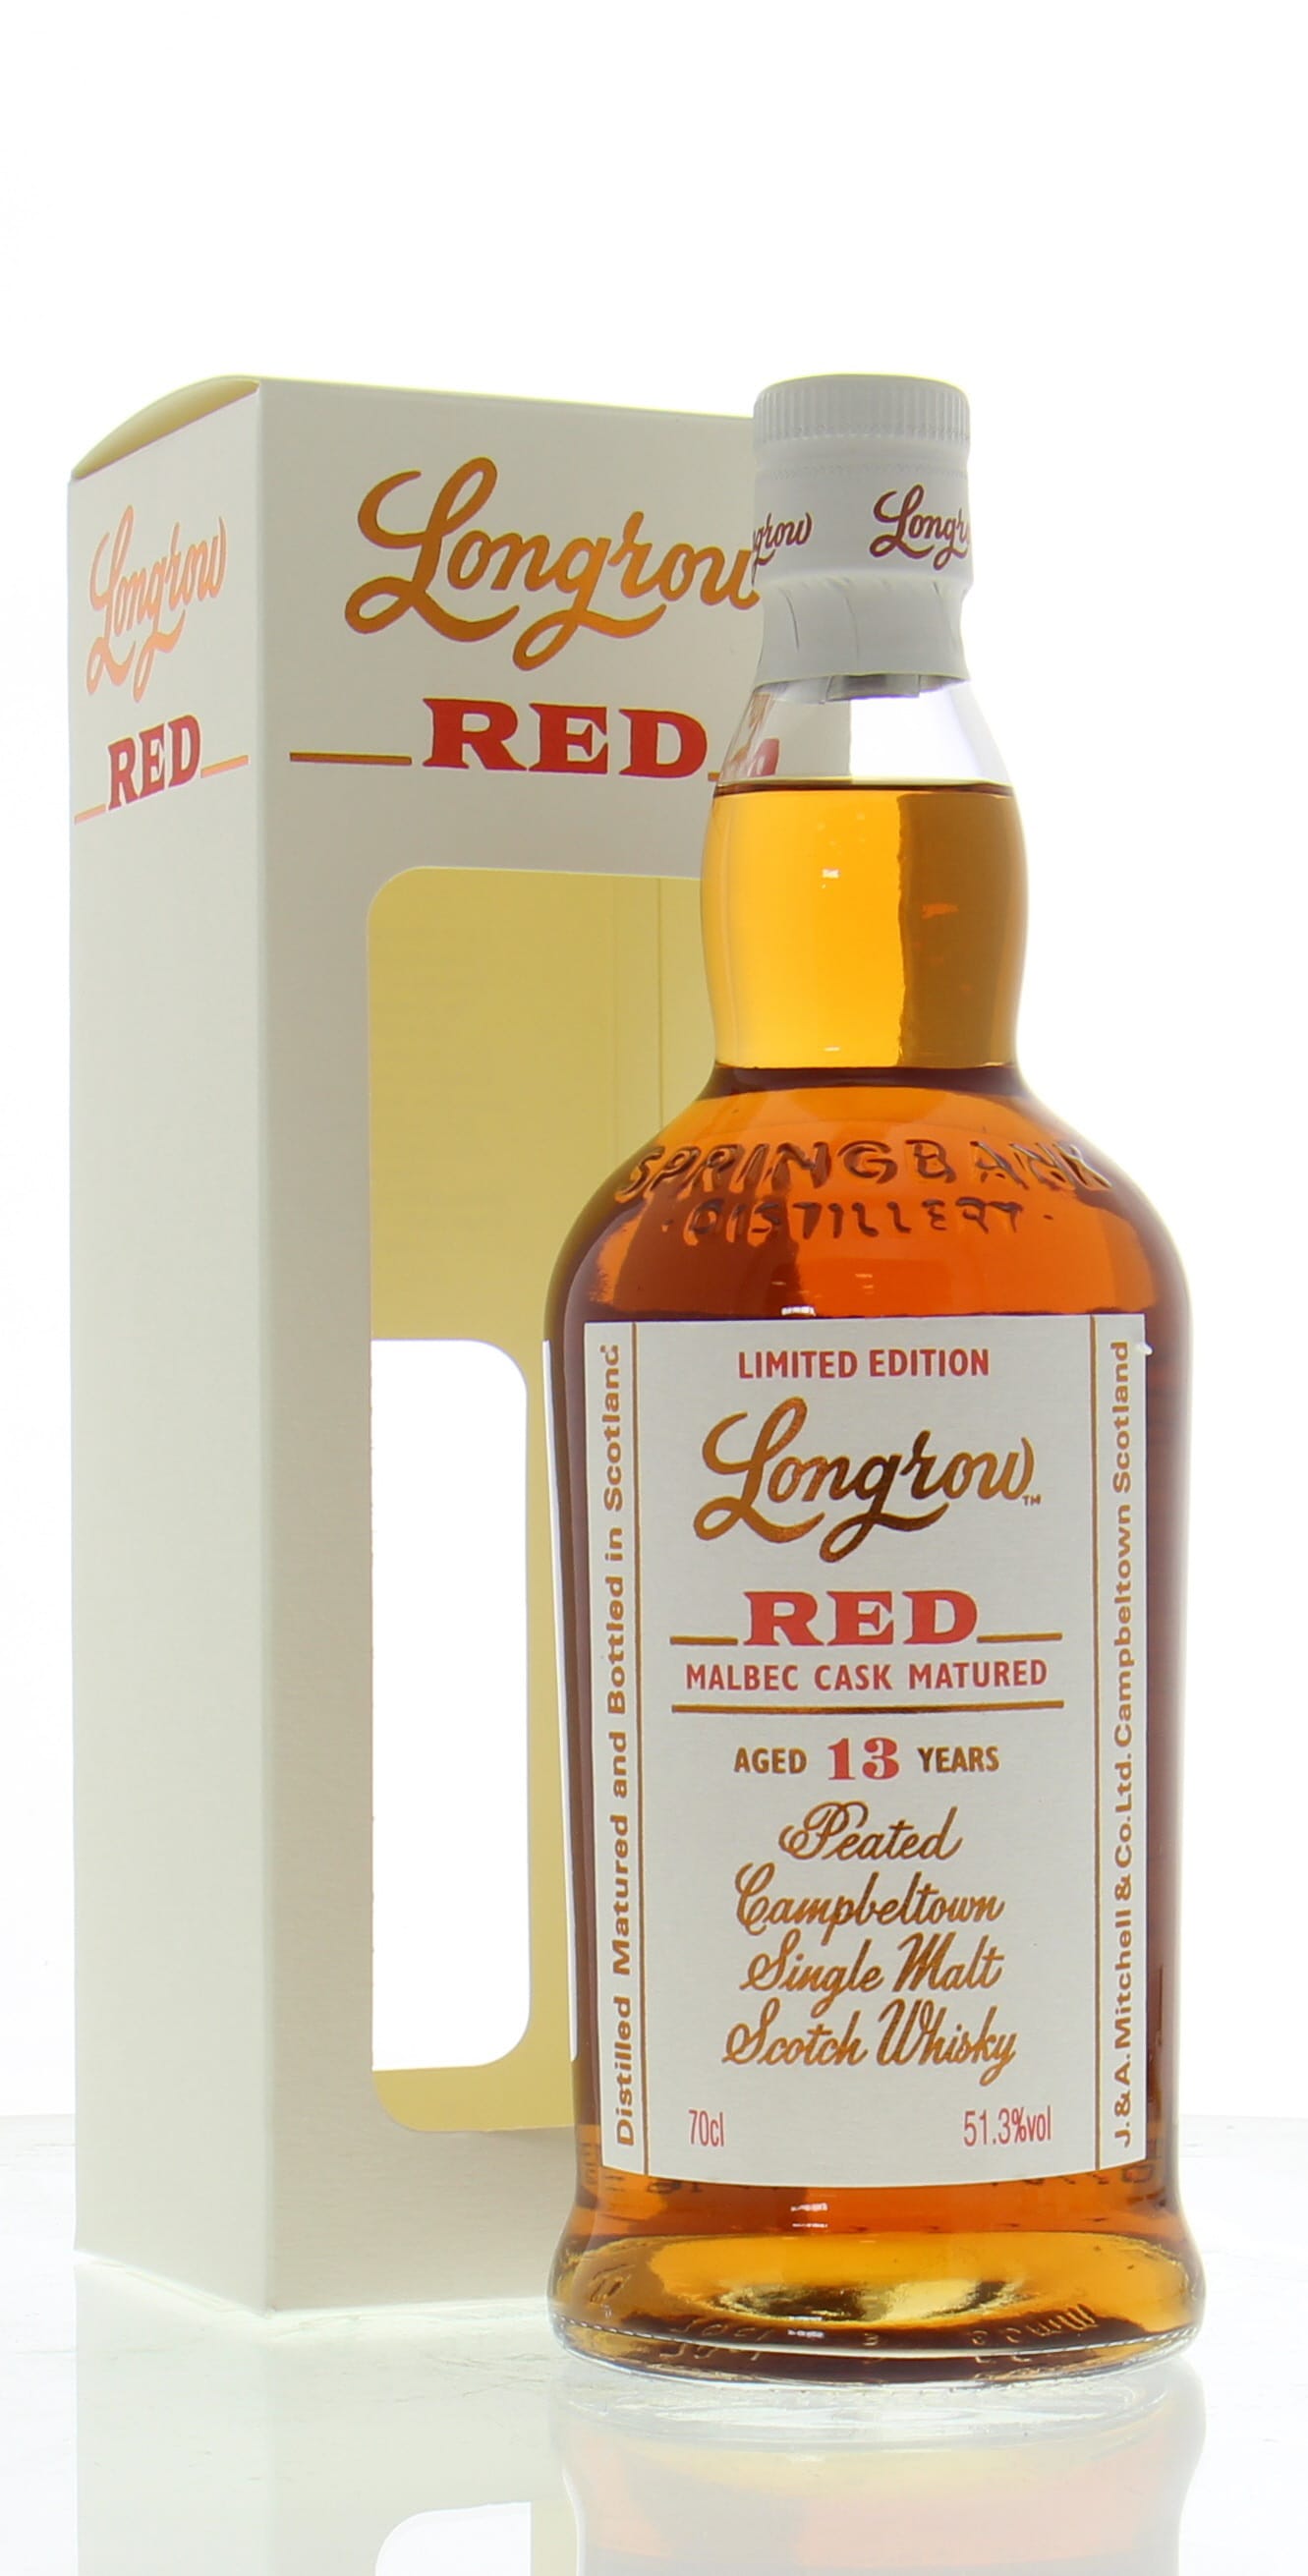 Longrow - 13 years Old Red Malbec 51.3% 2003 In Original Container